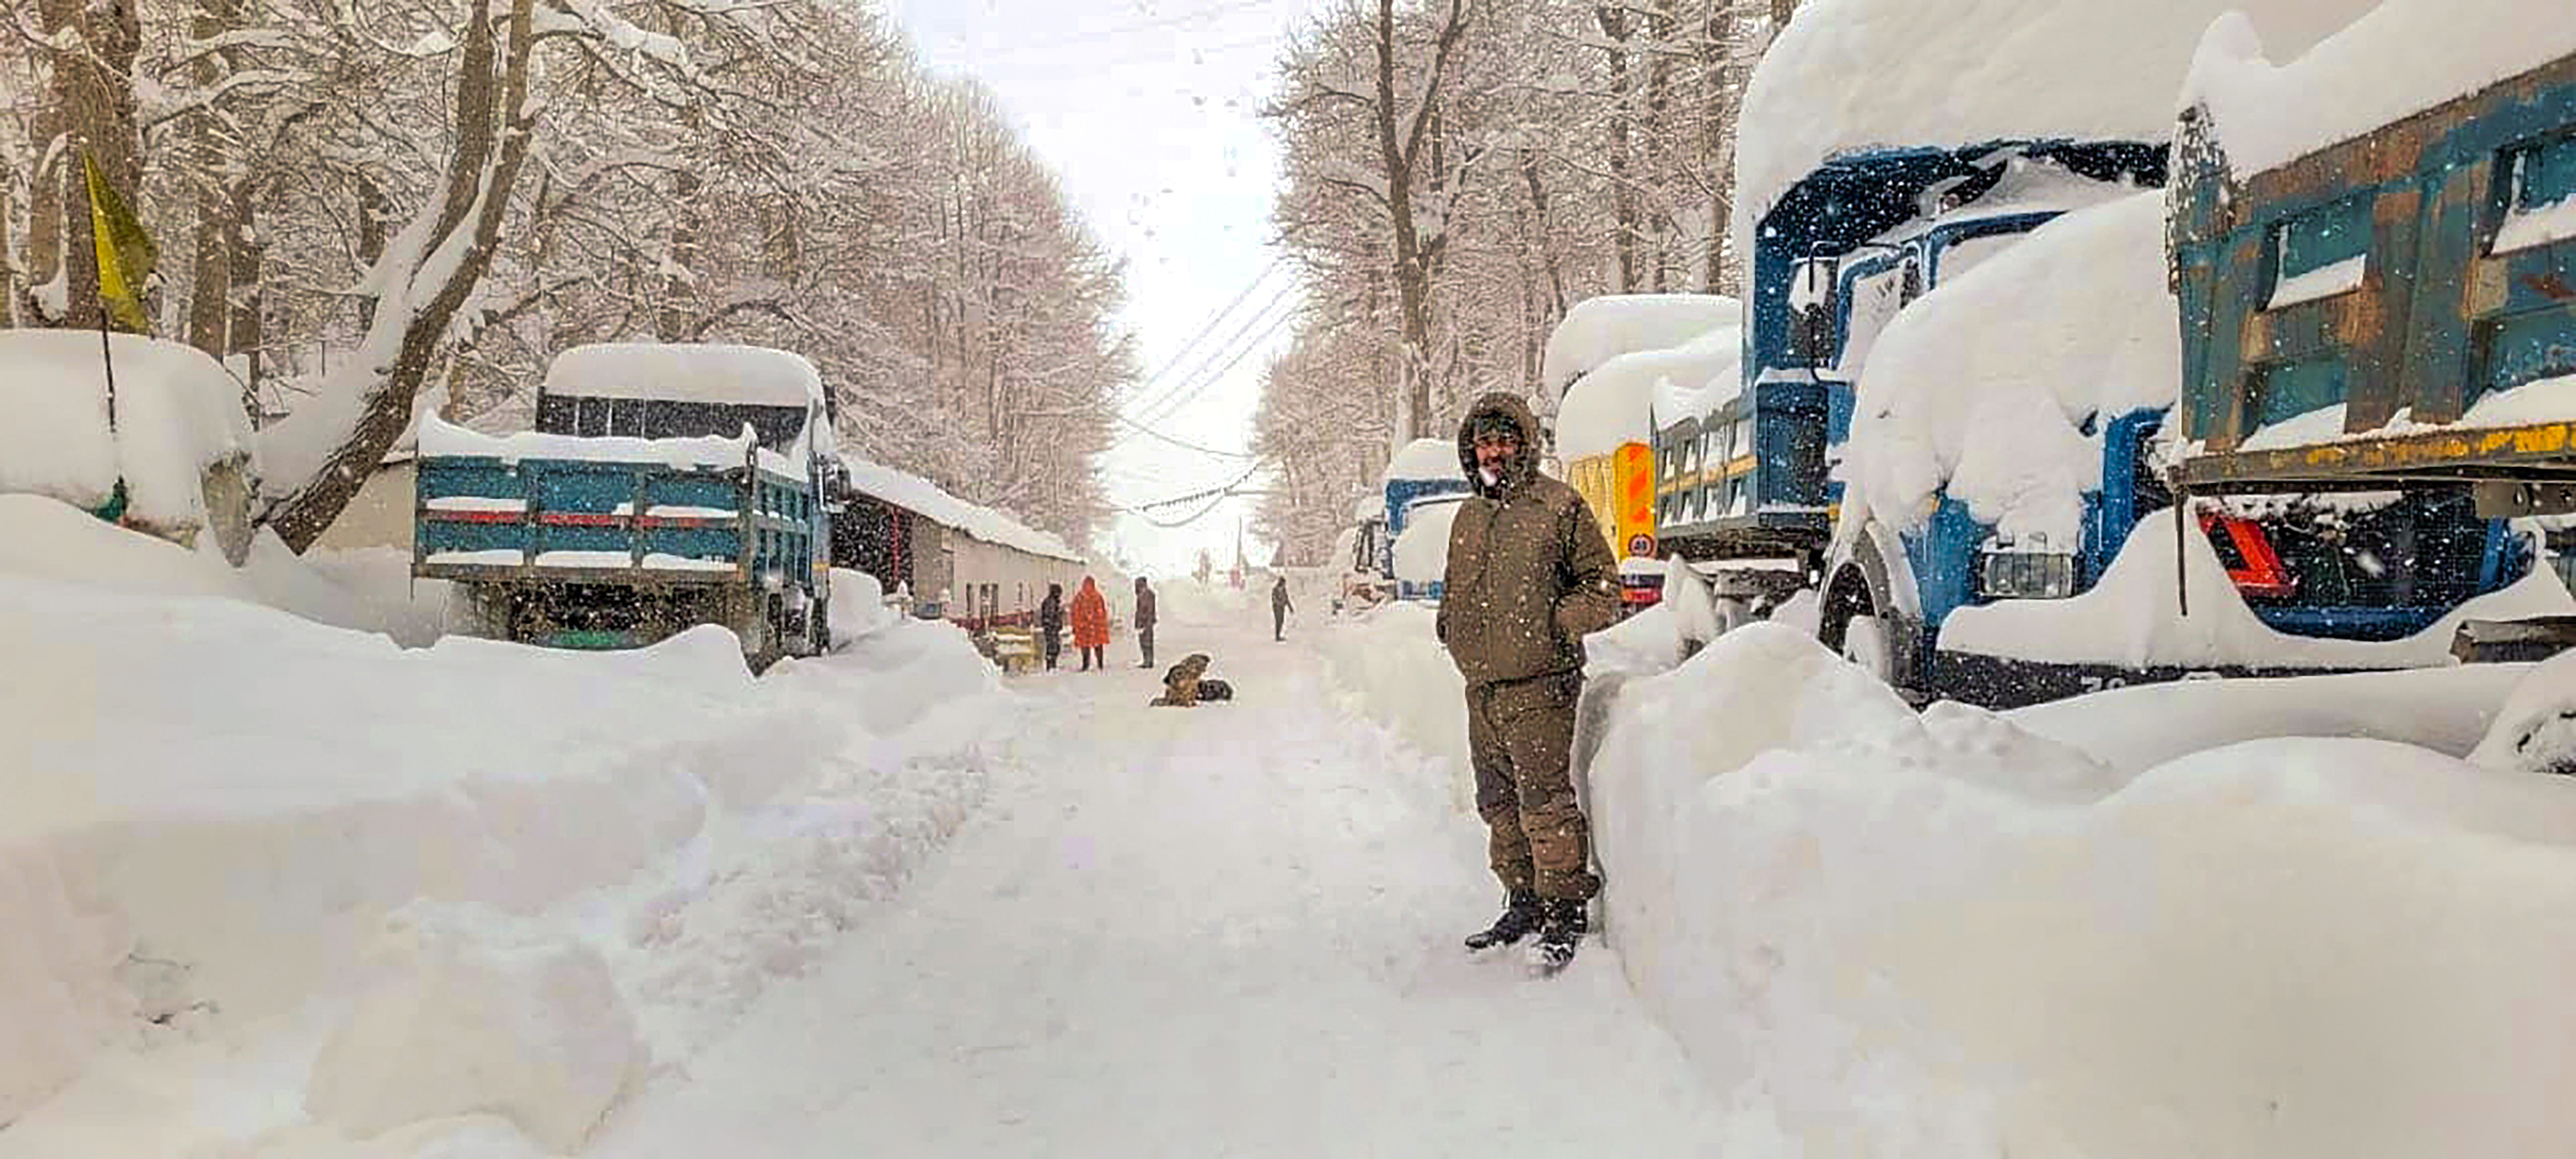 avalanche in lahaul and spiti obstructs chenab's flow; over 650 roads closed in hp due to snow, rain